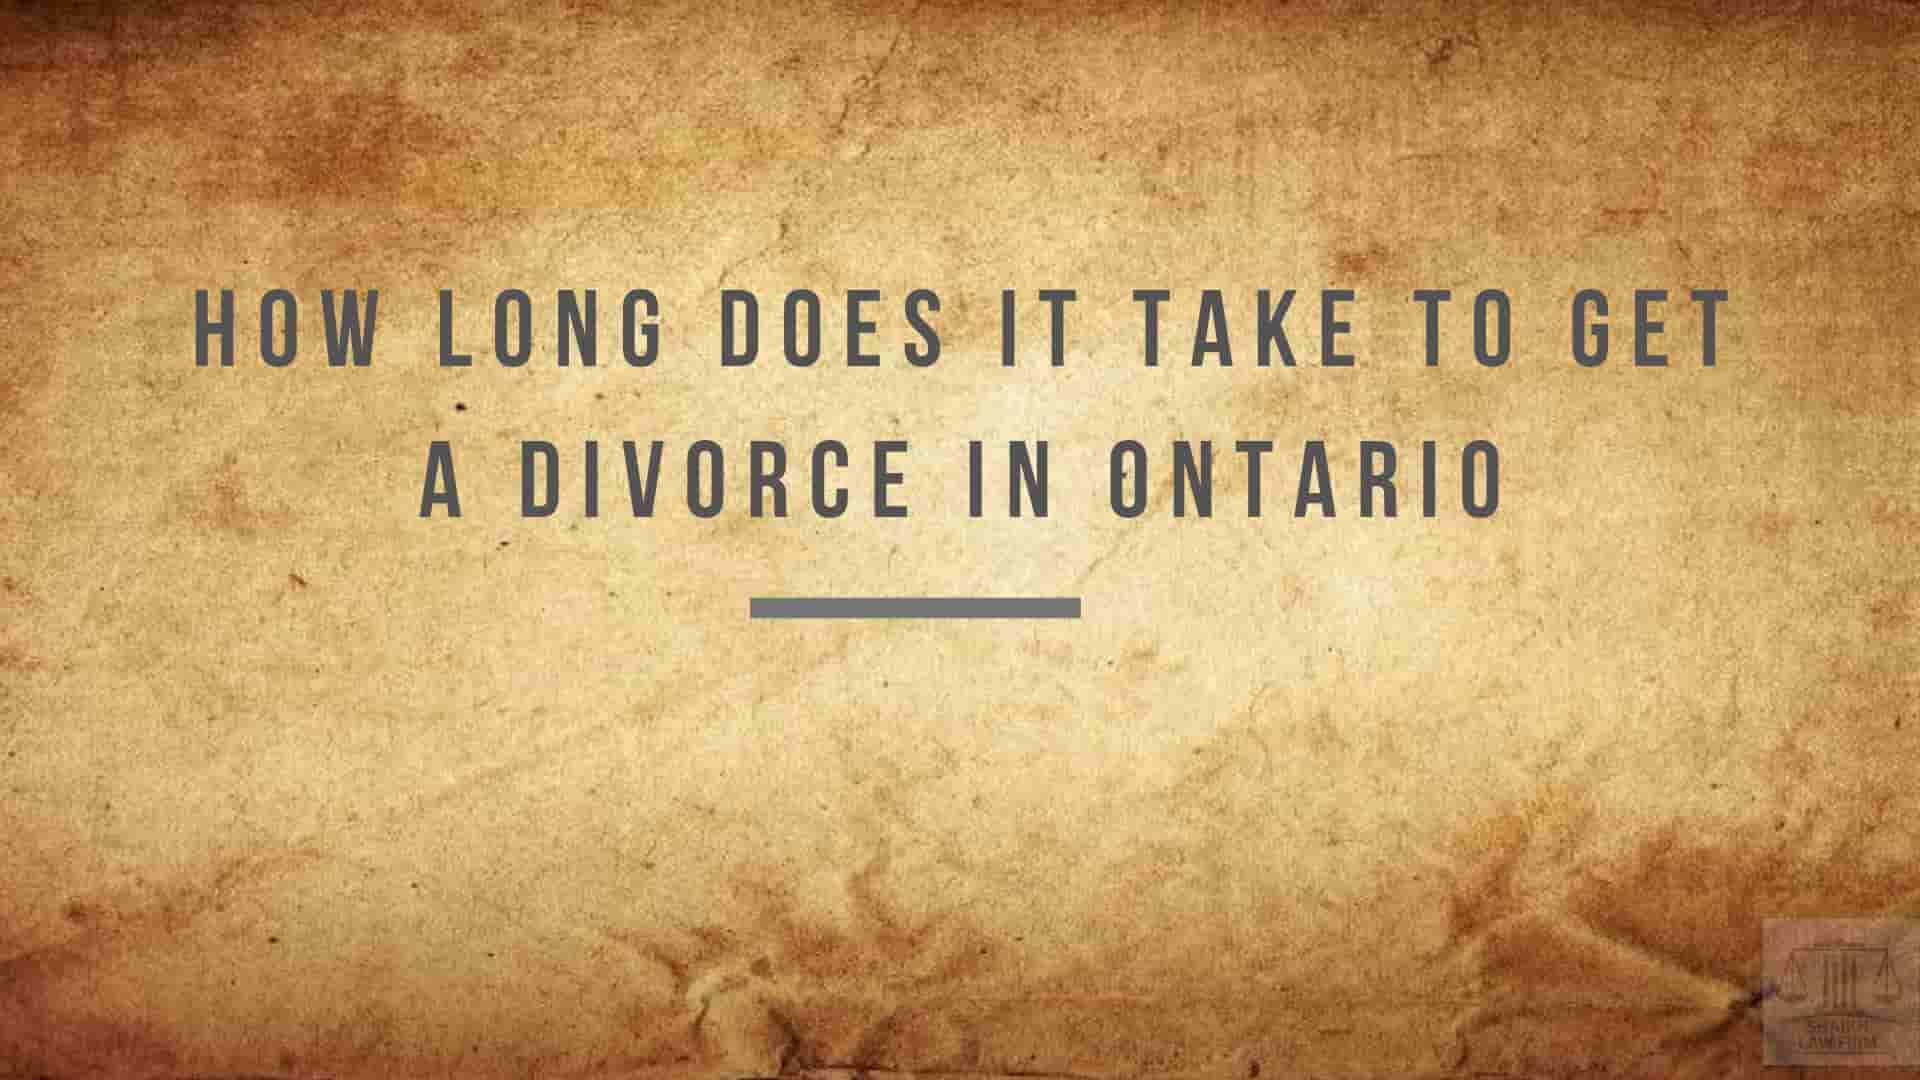 How Long Does it take to Get a Divorce in Ontario